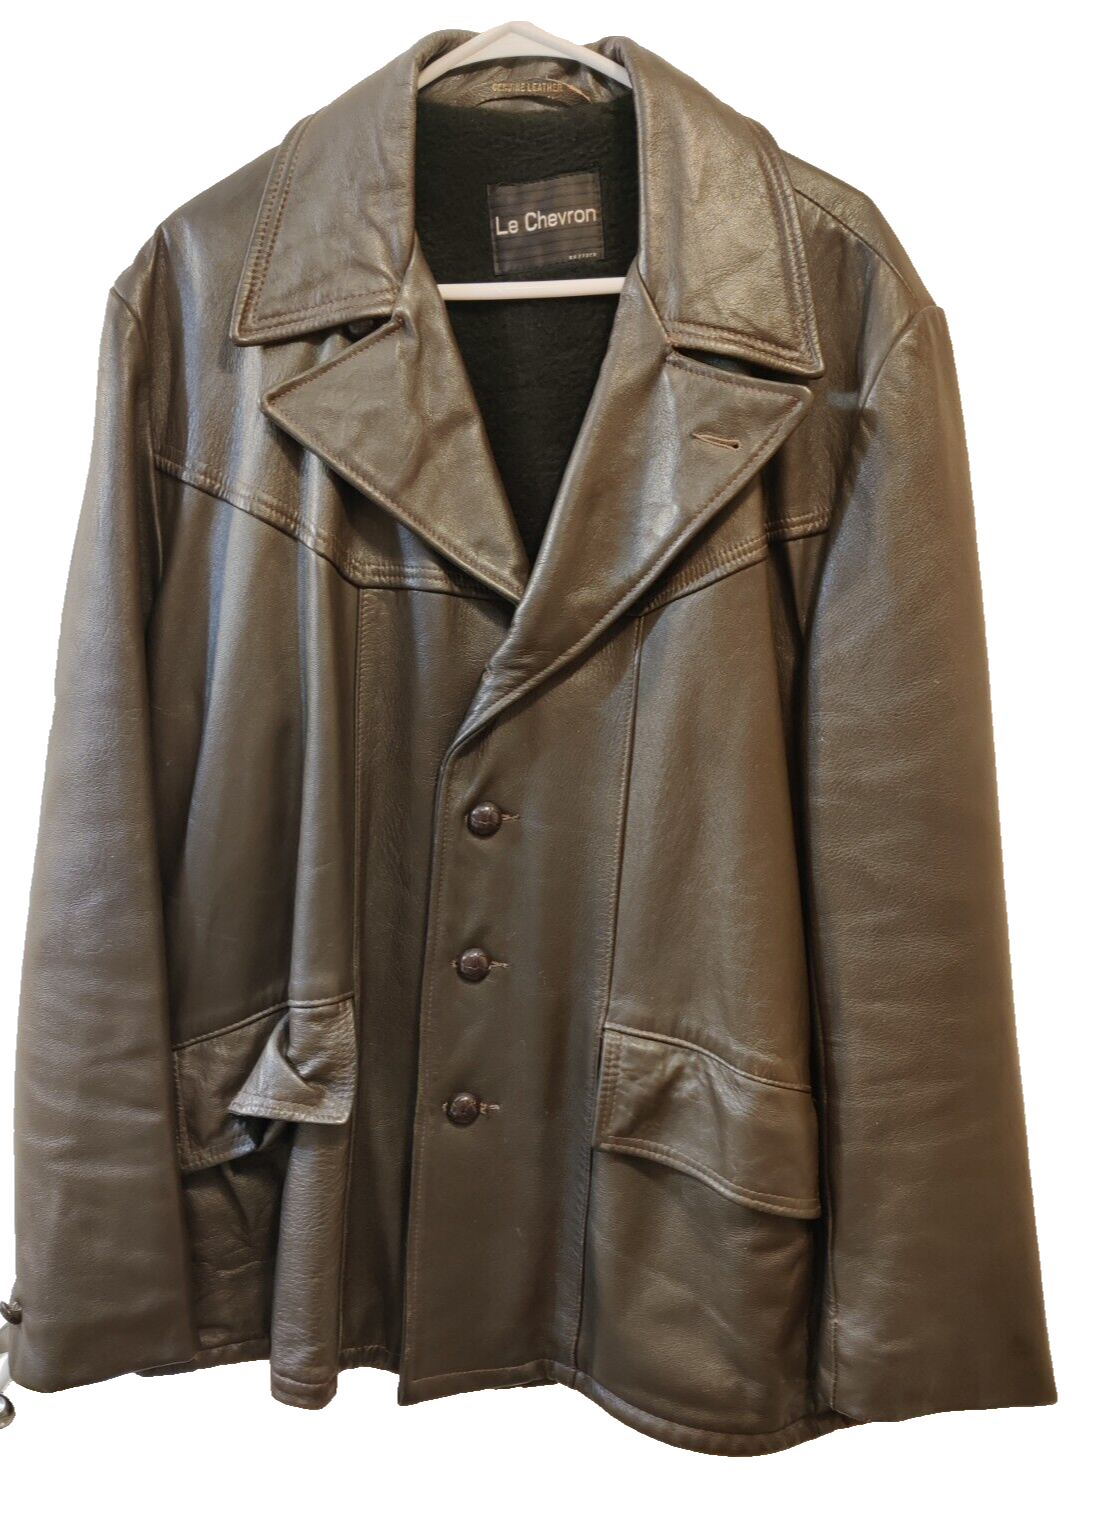 Primary image for Vintage 60s 70s Le Chevron Brown Leather Jacket Coat, Size 46-Very Cool!